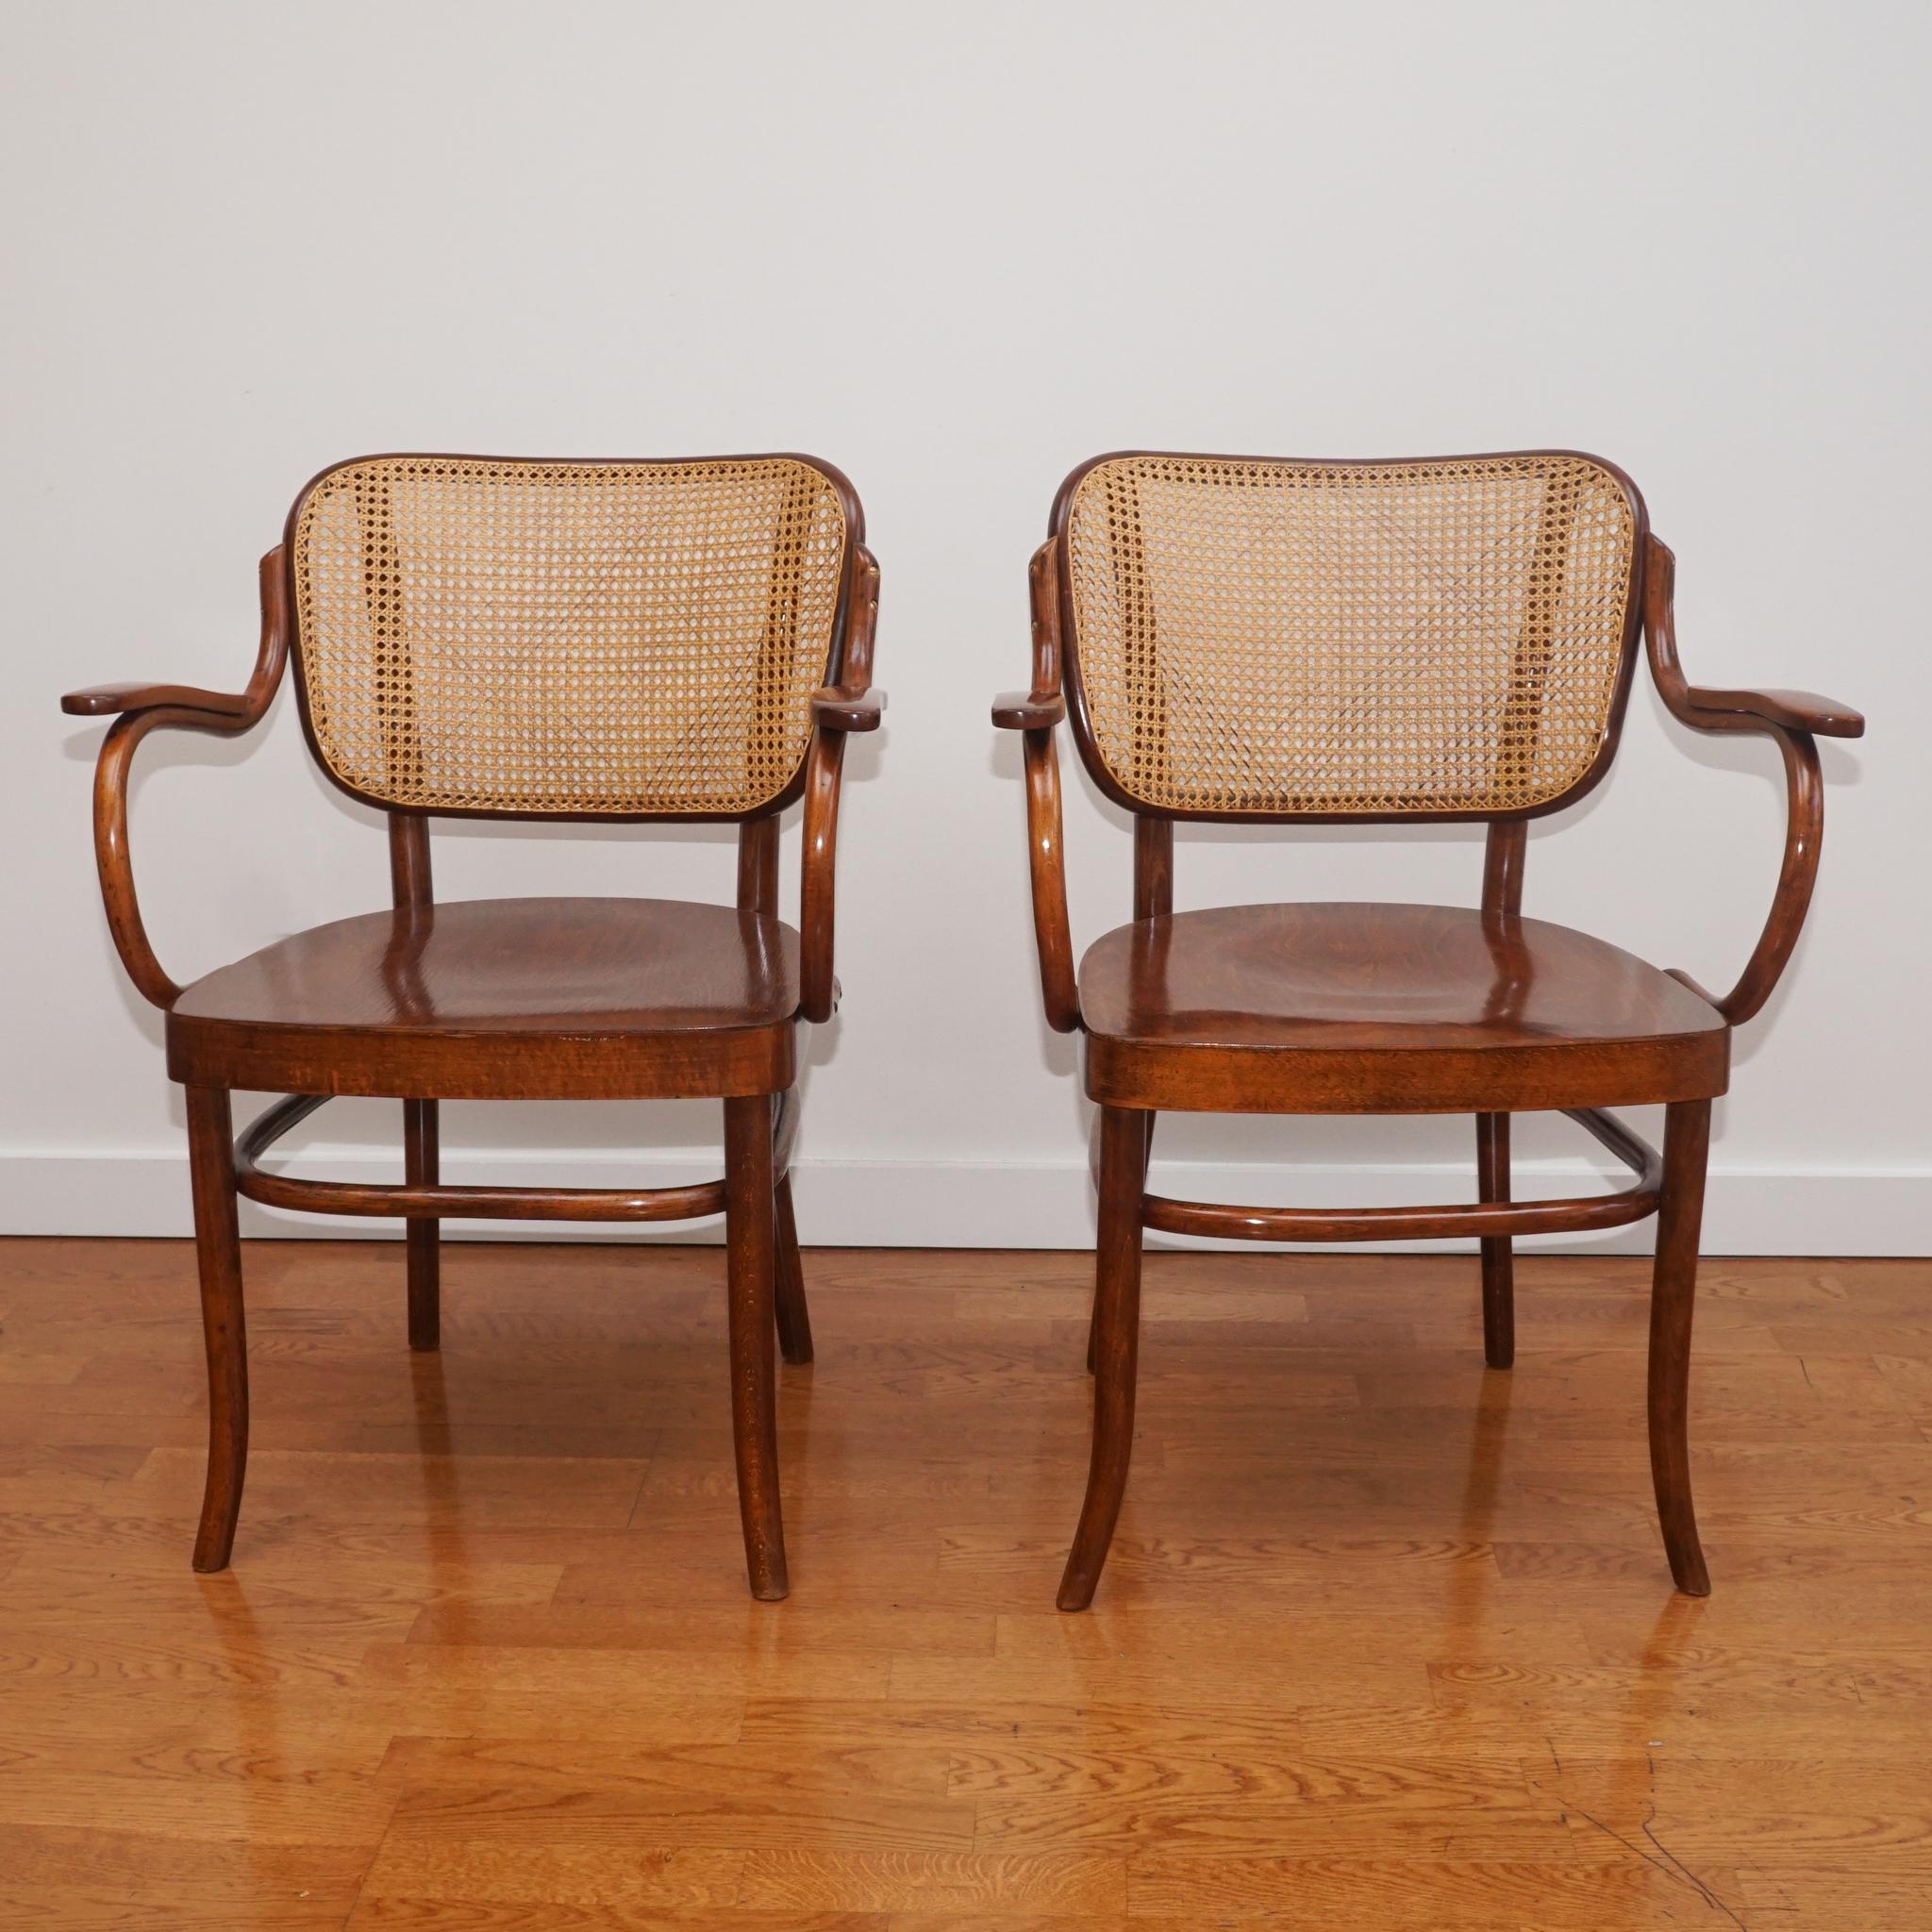 This exquisite pair of Thonet Bentwood Armchairs Model No. NR-283F. Designed in the 1930s by Gustav Adolf Schneck for Thonet-Mundus, the chairs are constructed of bent beechwood and feature cane backs and plywood seats.  Since they are both in very